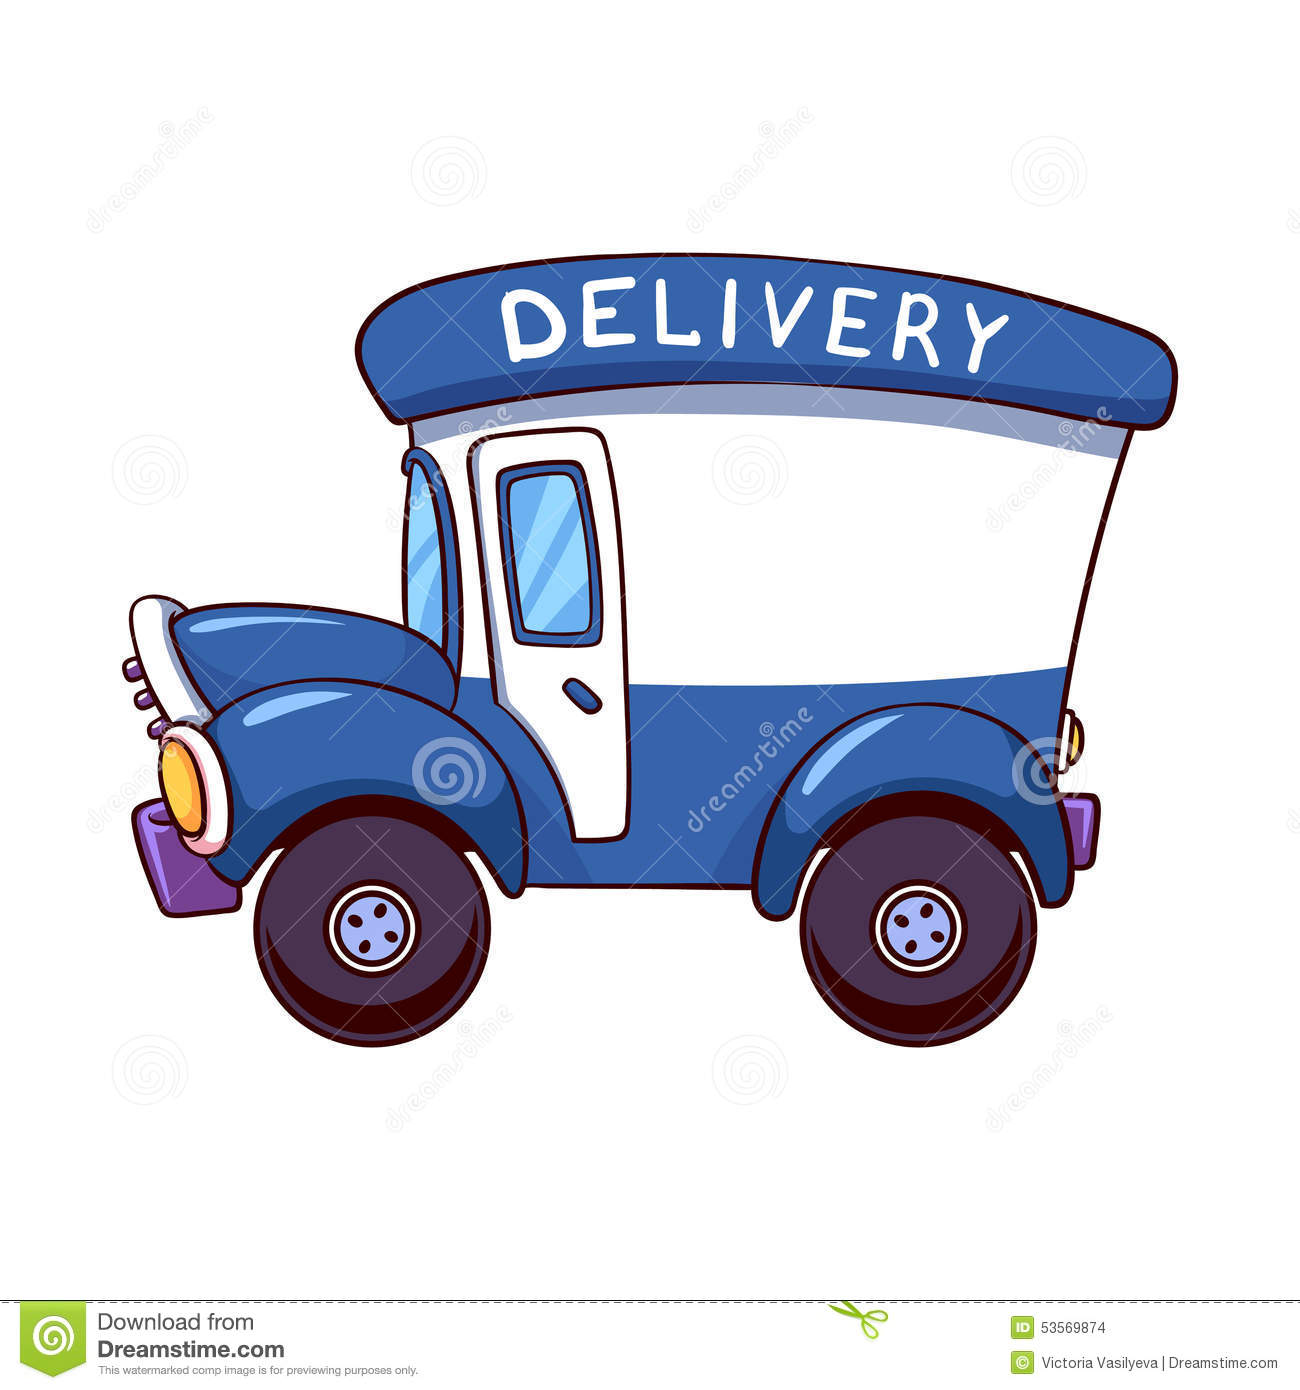 471 Delivery Truck free clipart.